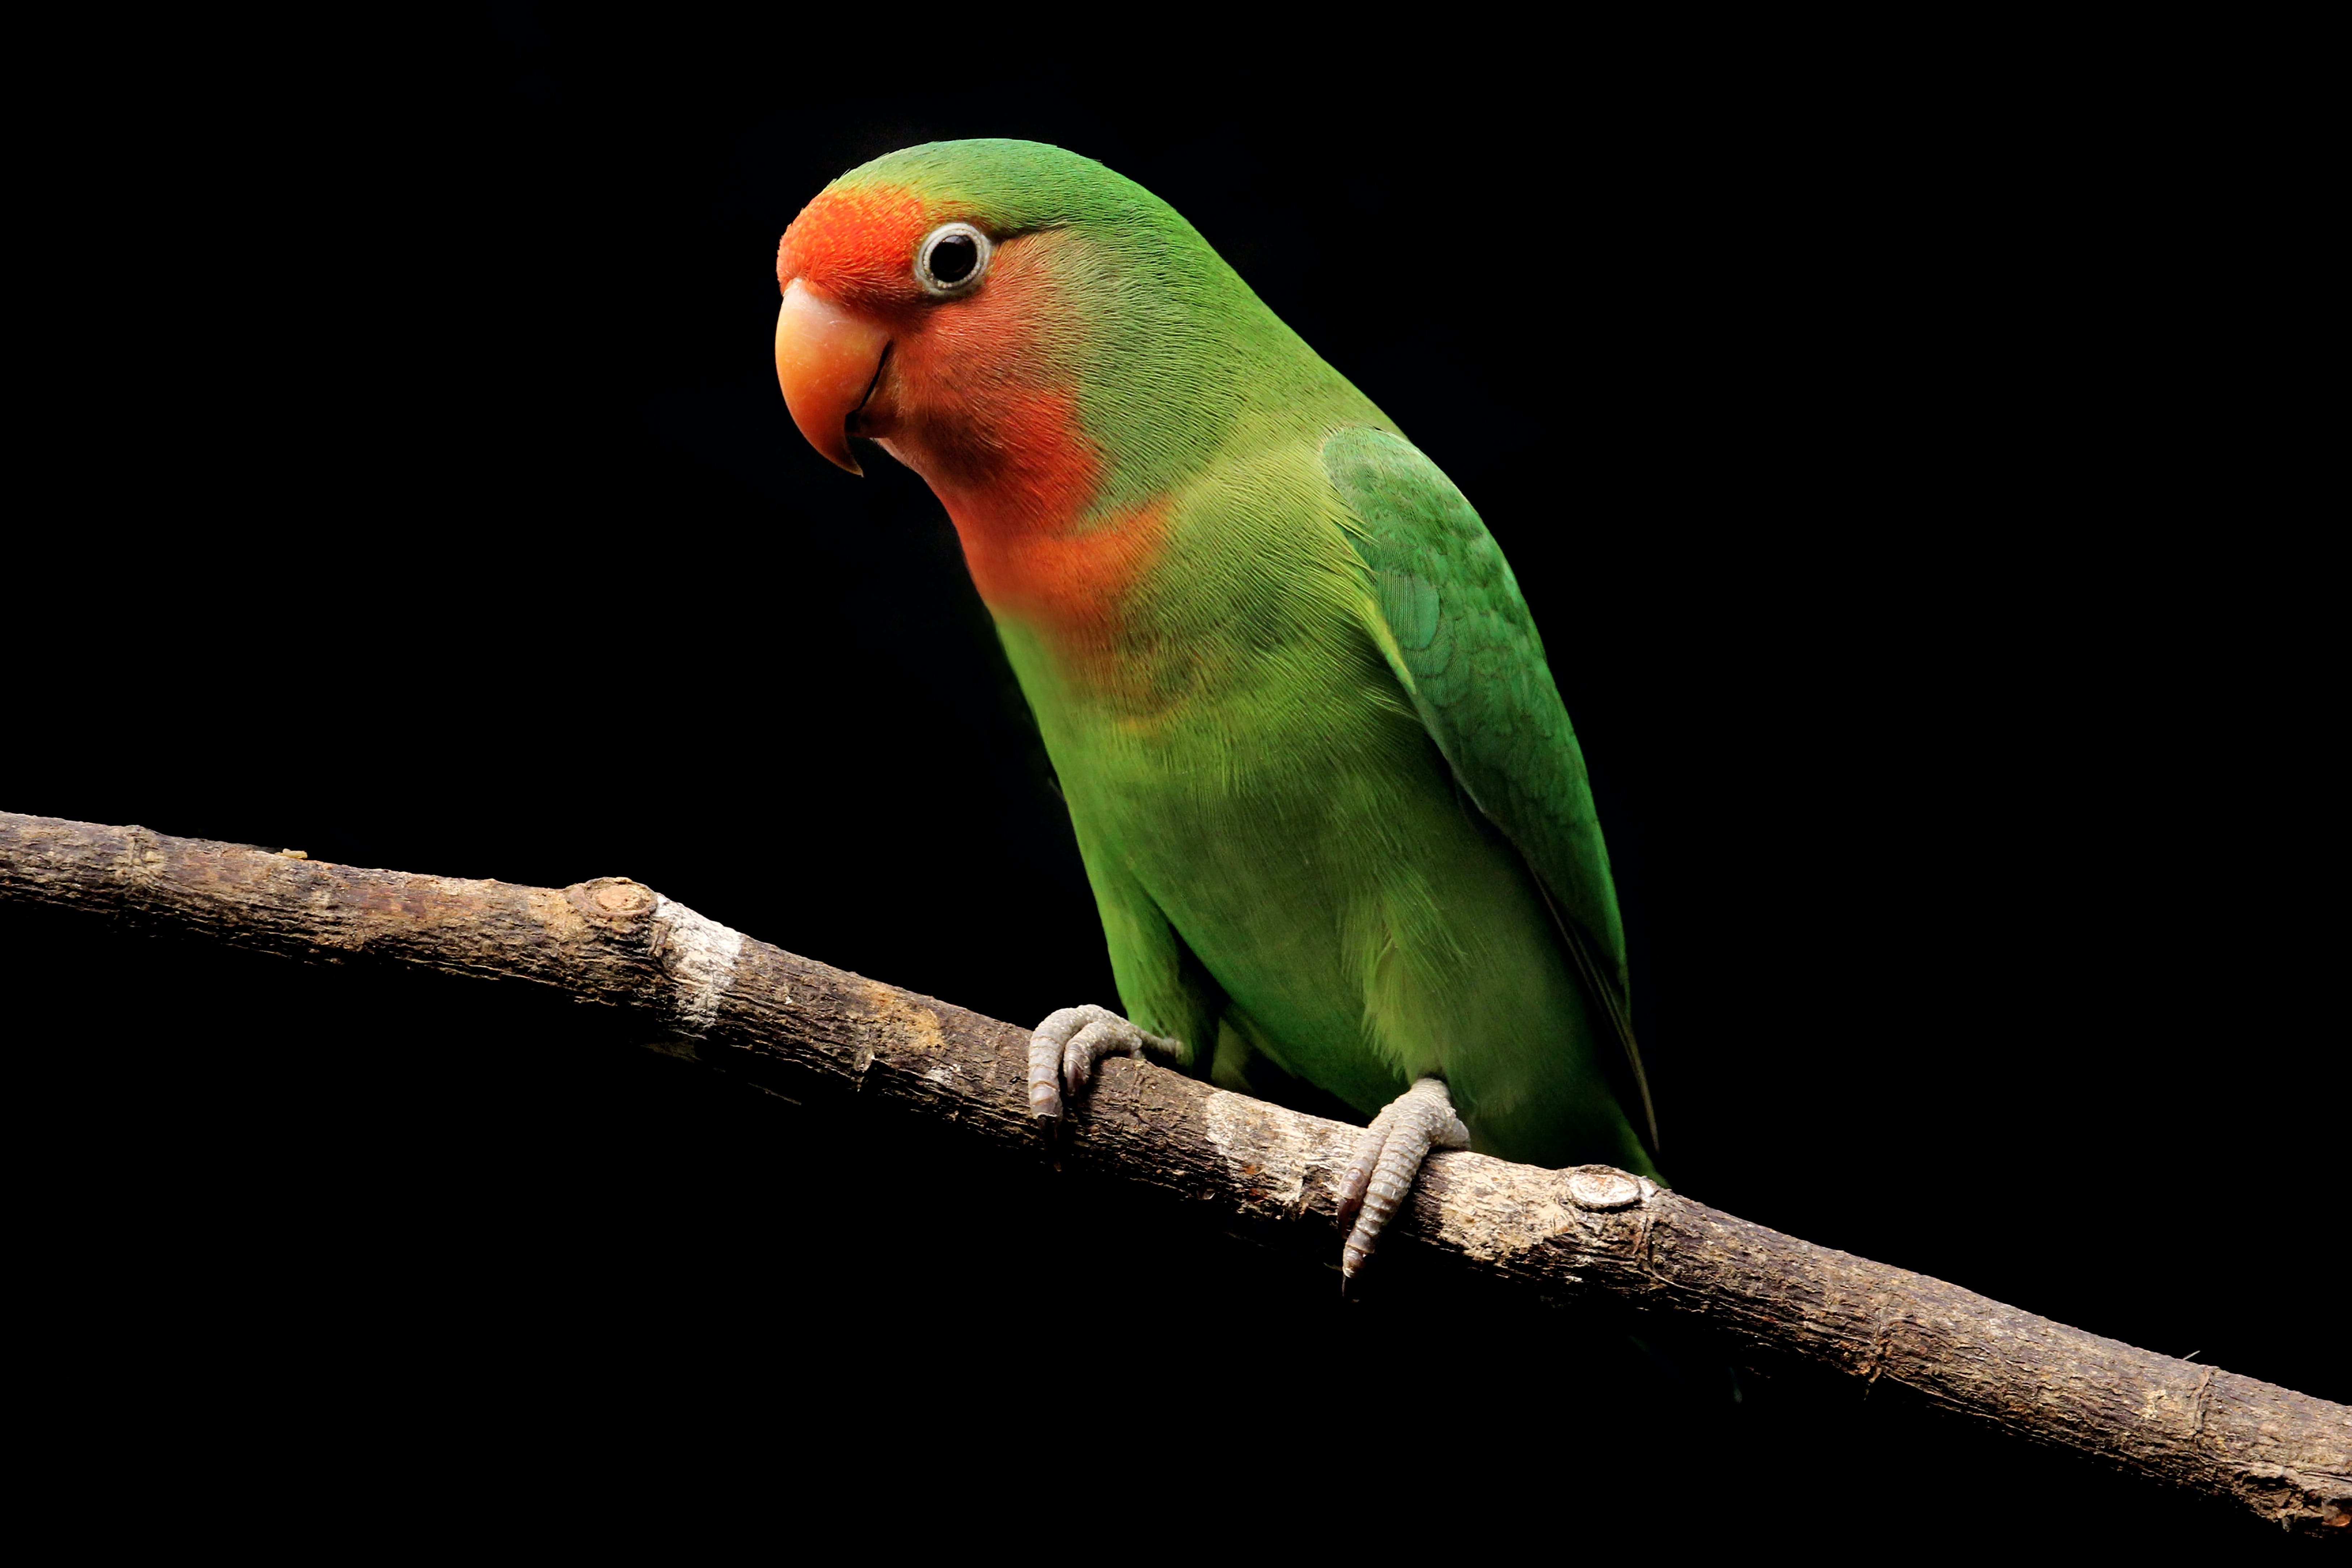 image from Swinging parrots